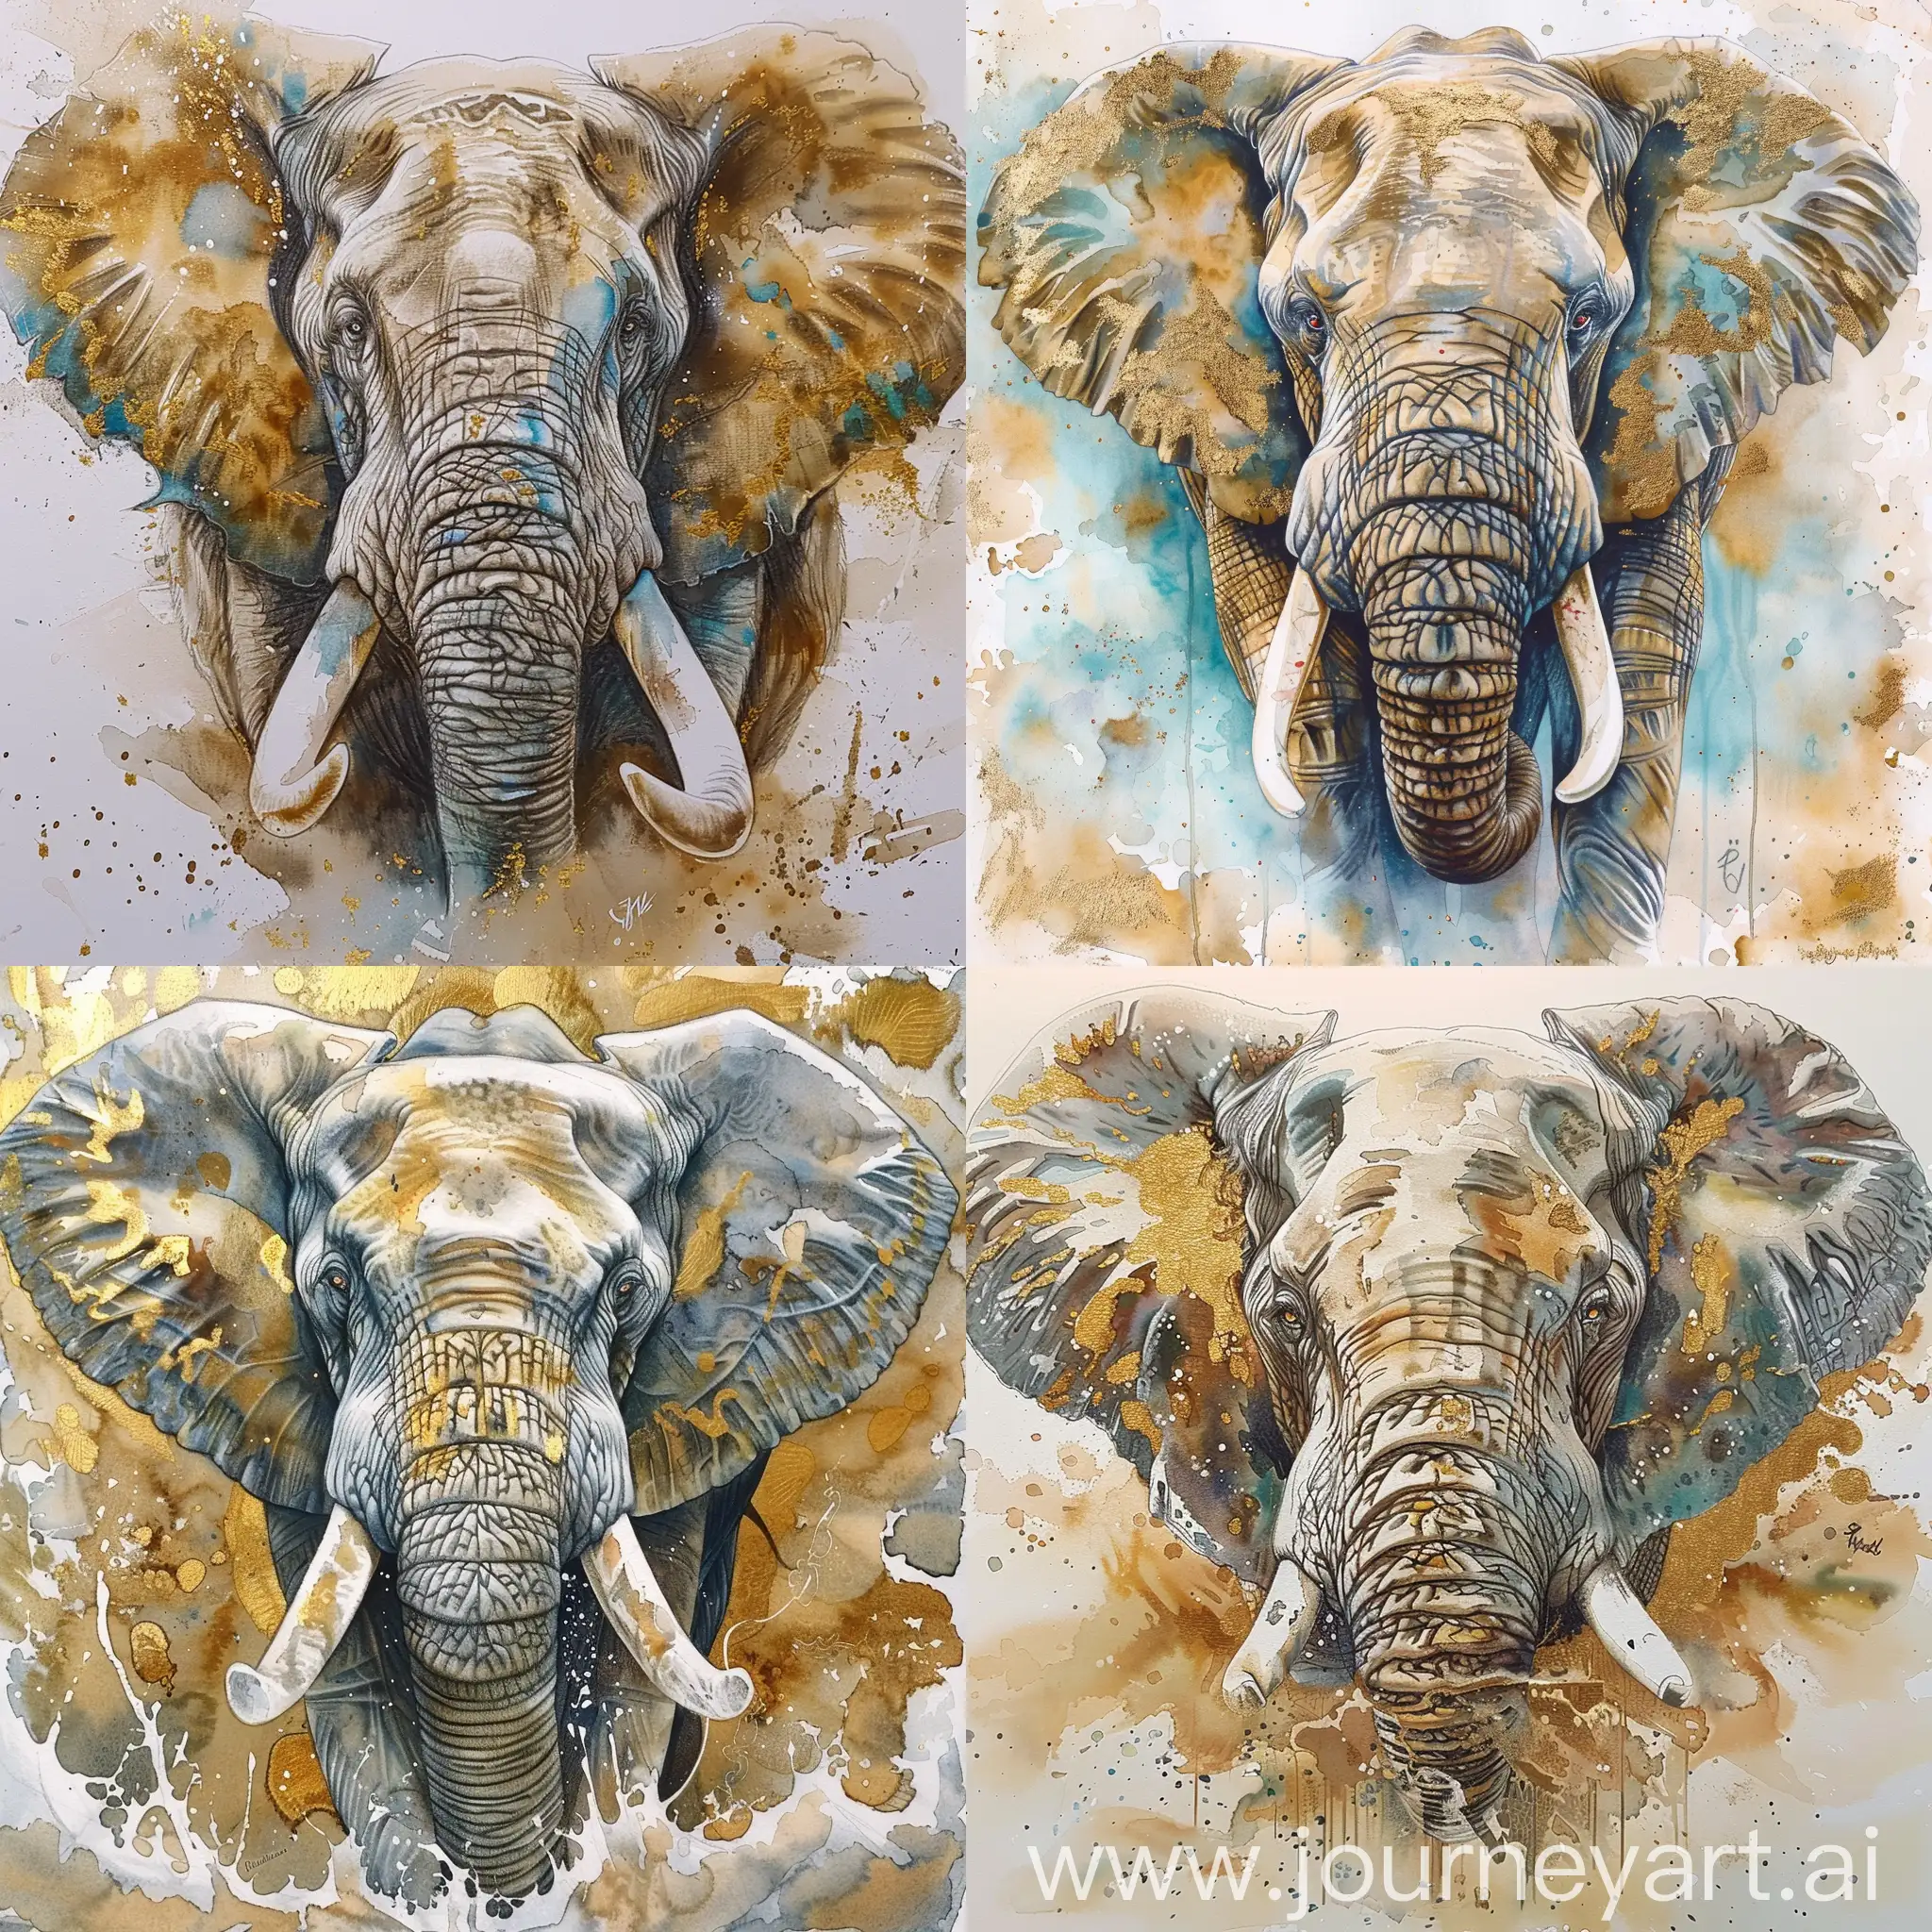 A grown up elephant  with eyes of wisdom Looping at me , painted in  watercolours of gold , türkise, and White 